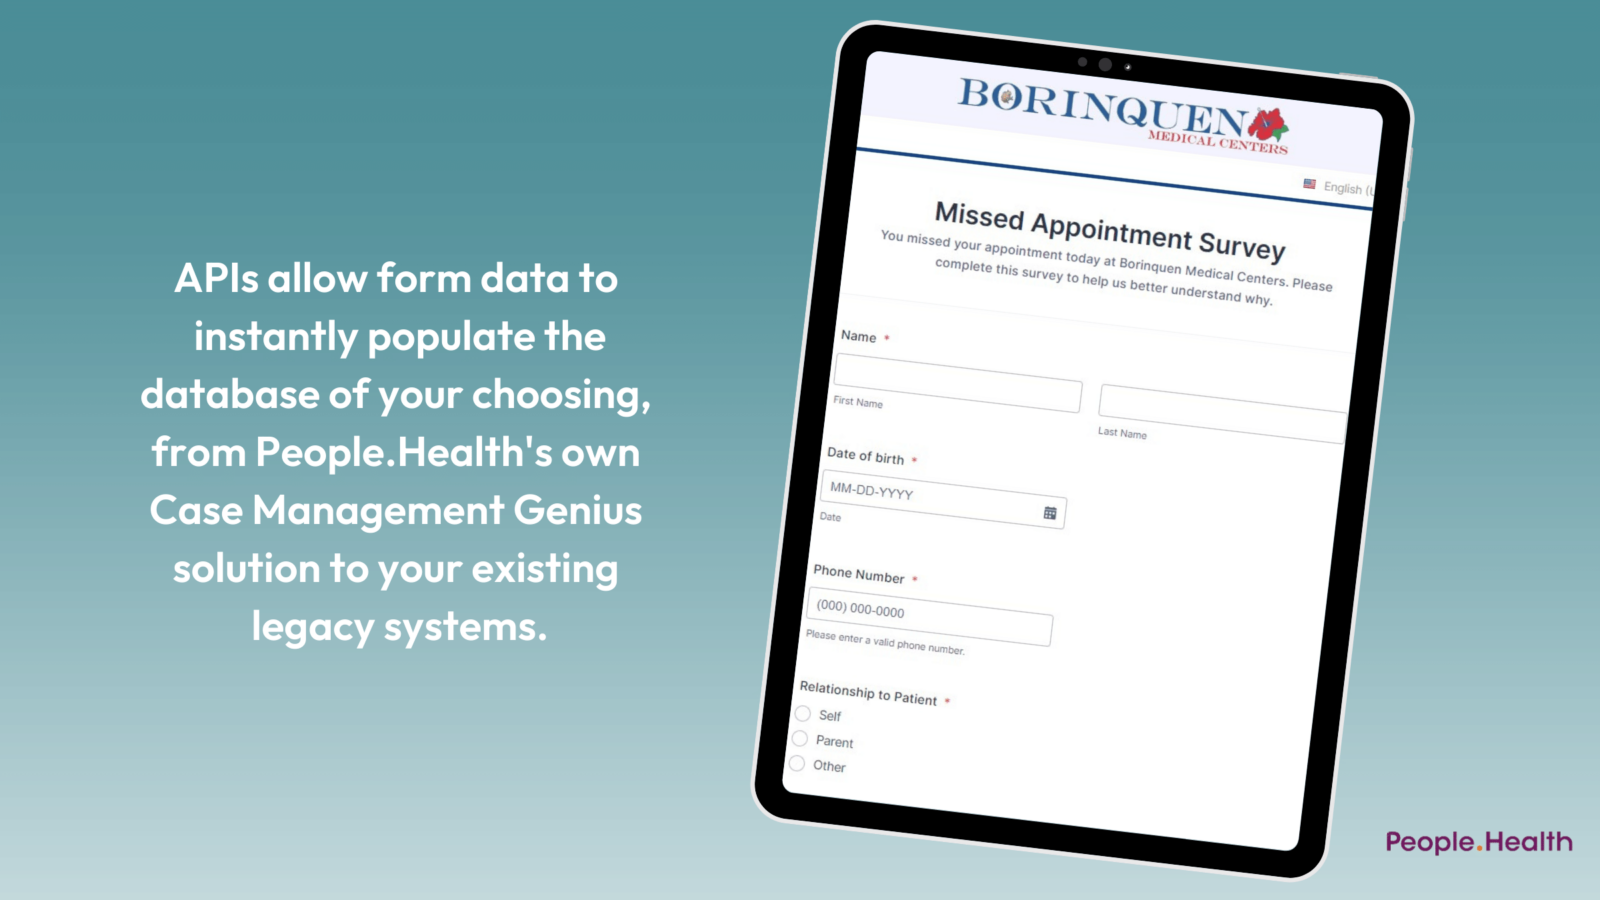 APIs allow form data to instantly populate the database of your choosing, from People.Health's own Case Management Genius solution to your existing legacy systems.